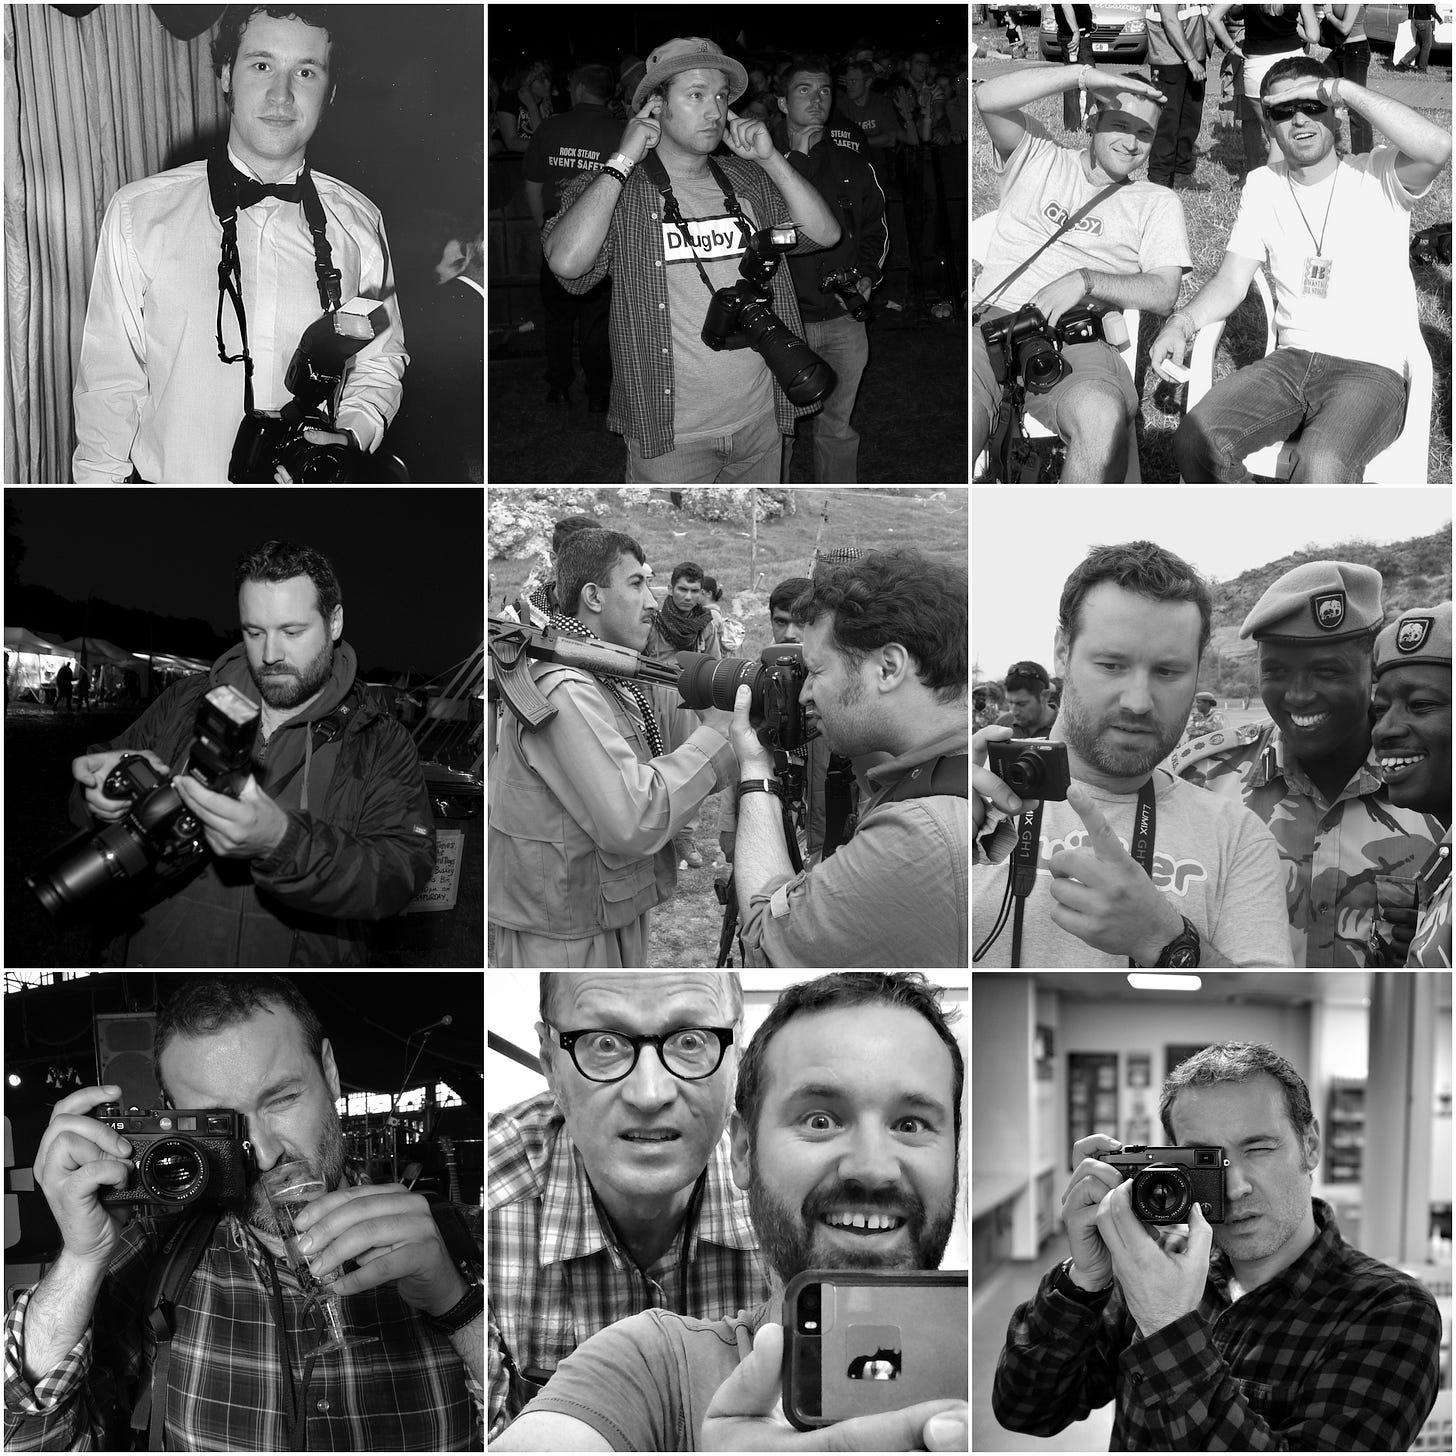 A montage of nine images in a square. Top left image is of me in a dickie bow and shirt with an SLR taking photos at a posh event in Rugby. Top middle is a photo was taken at V fest 2004 and I have my fingers in my ears in the photographers pit sporting a DSLR with a long lens. Top right sees me and Noel alleger squinting into the sun at Glastonbury with a camera in my lap. Middle right is a photo taken my Brian Jones of me chimping. Middle middle image was taken in northern Iraq during the war in 2005 as I take a photo of the word Komala engraved into someone’s AK47 (photo by Phil Sands). Middle right is an image of me sharing snaps off a compact with members of the KWS in Kenya, Africa. Bottom left is of me using a Leica M9 while sipping champagne at MK Fest. Bottom middle is a phone selfie taken in a mirror of me and Ade Edmondson at MF Fest. Finally, bottom right is a photo of me shooting a Fuji X100. Image by Marc Horner.